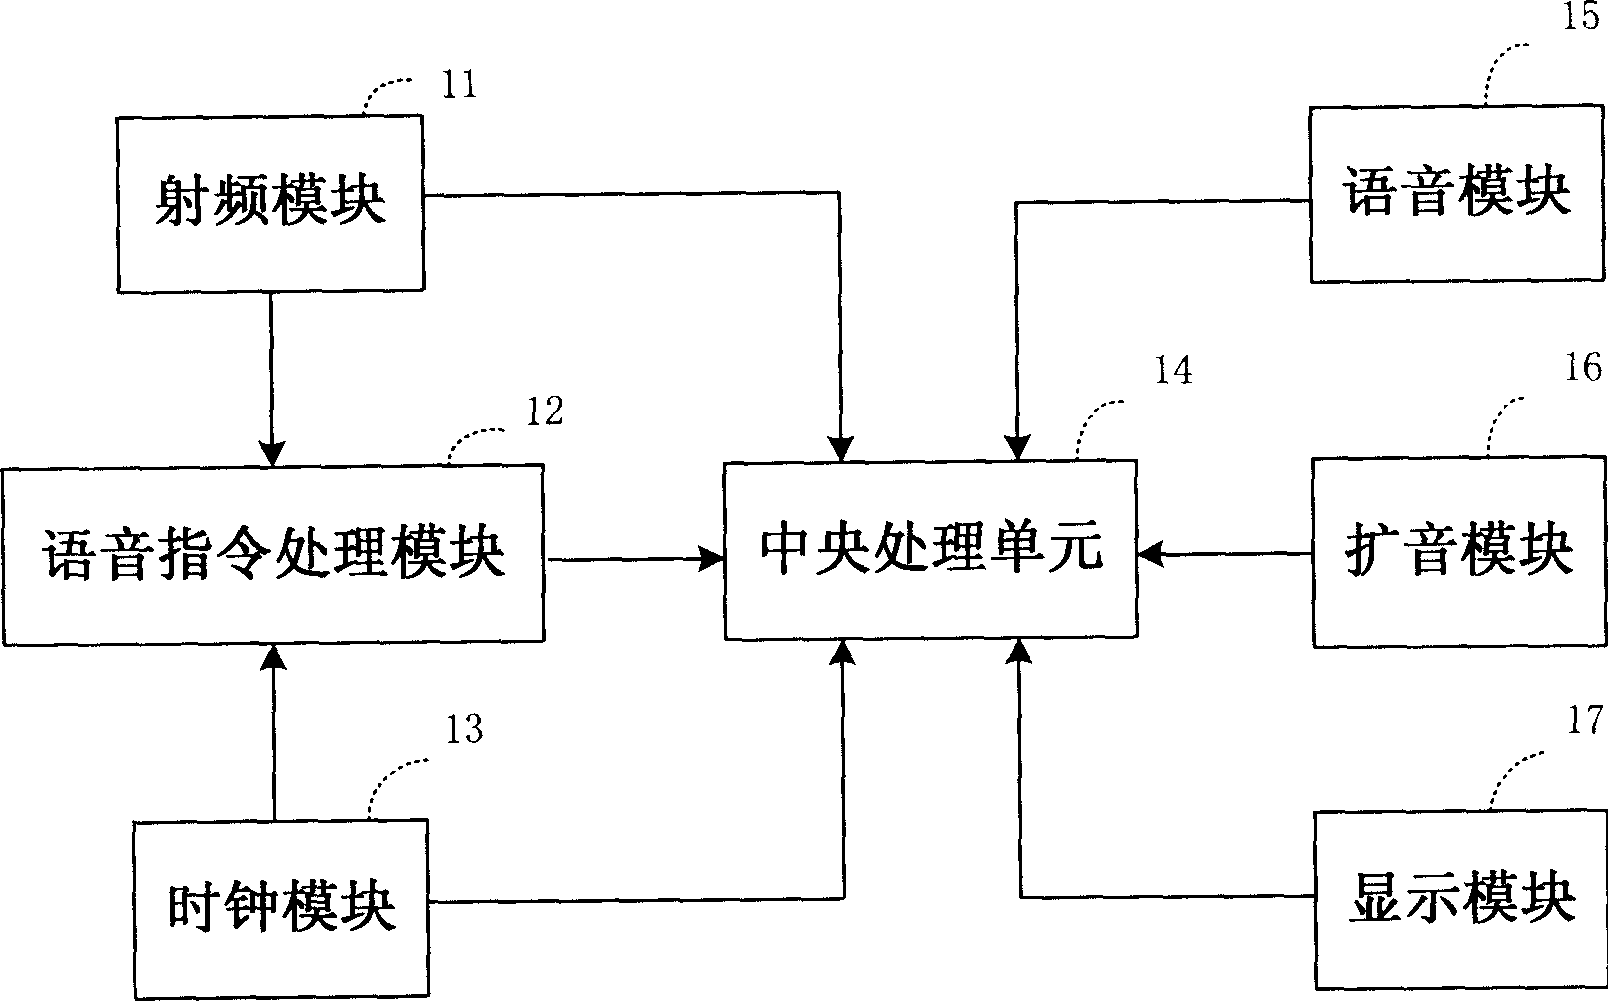 Voice automatic processing method of foreign communication event for mobile phone